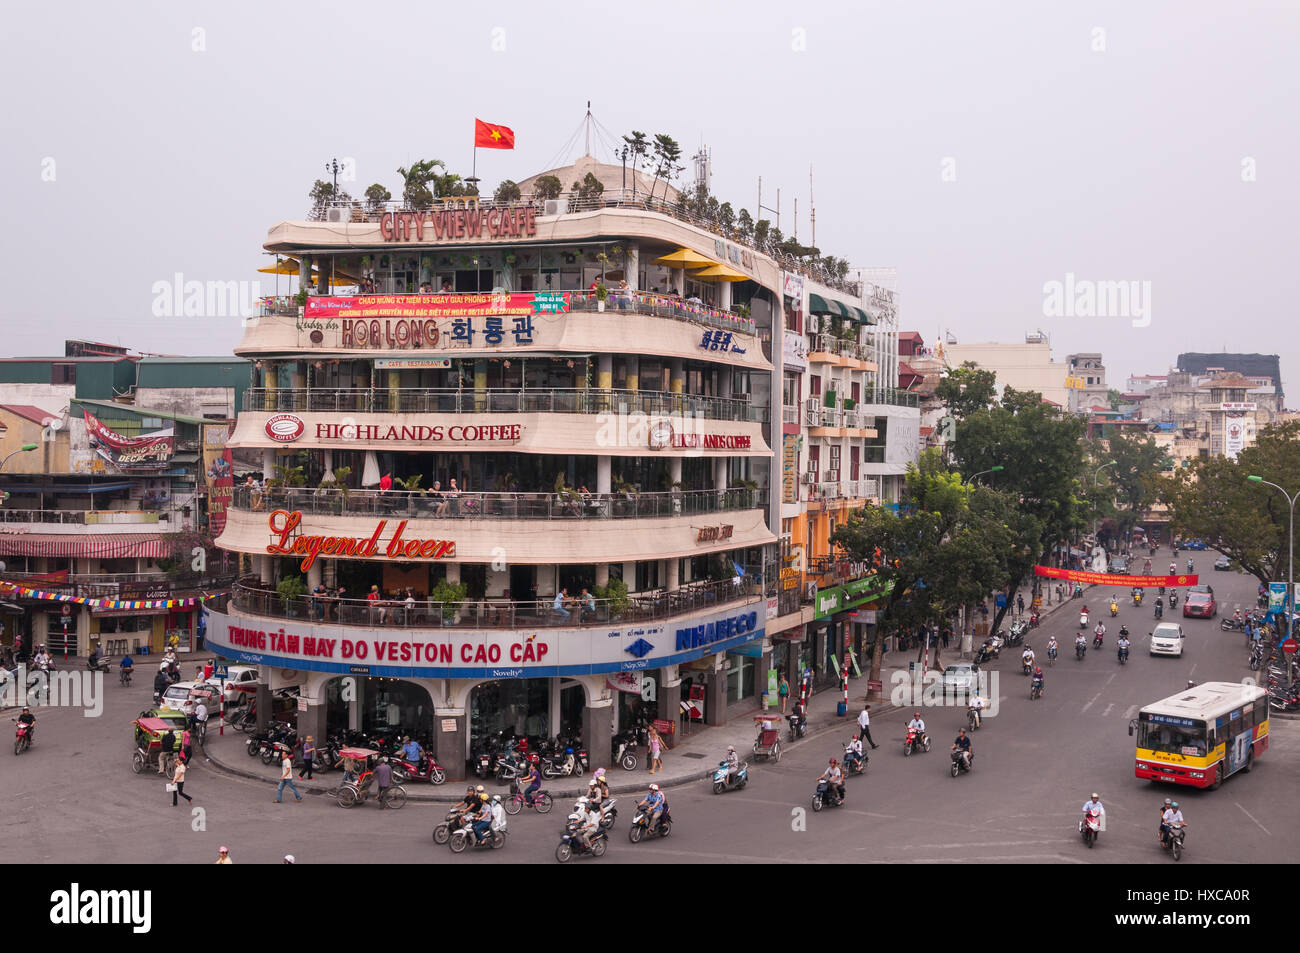 The Highlands Coffee building at Dong Kinh Nghia Thuc Square roundabout junction in Hanoi city, Vietnam Stock Photo